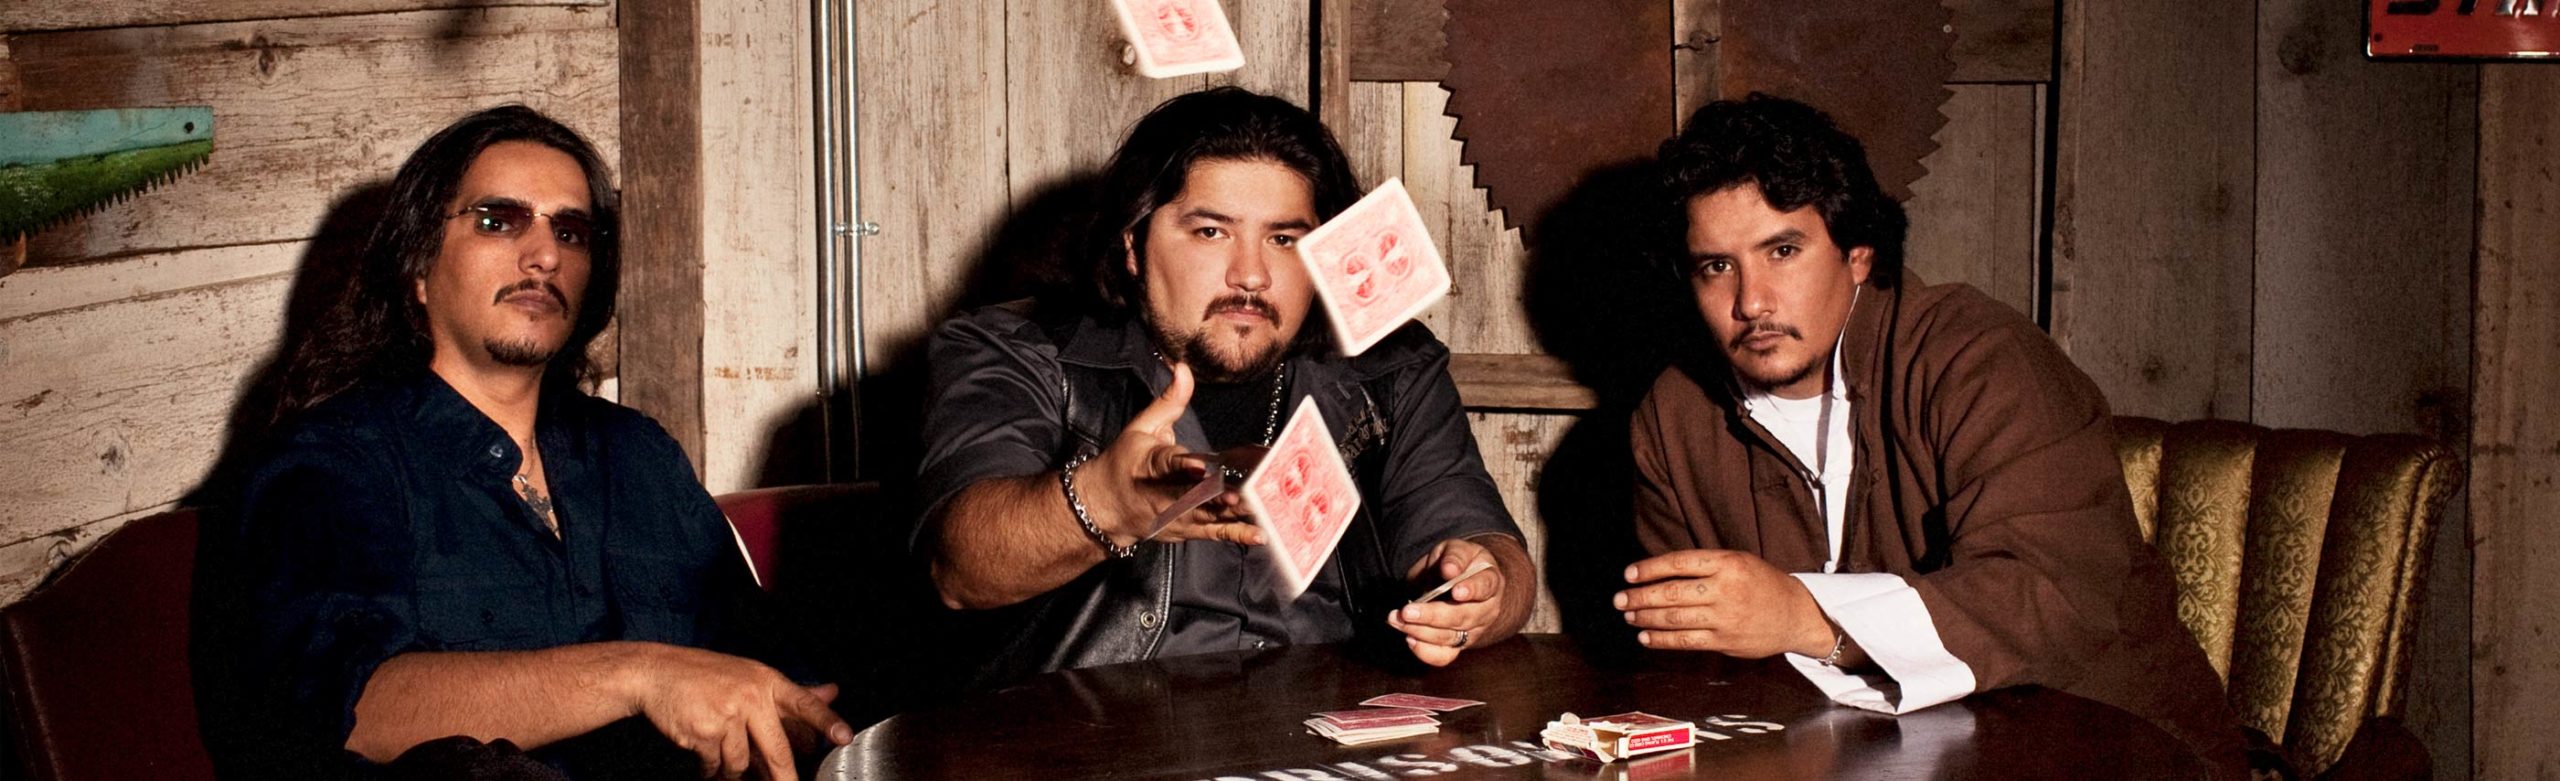 Texican Rock n’ Roll: Los Lonely Boys Will Return to Missoula Image